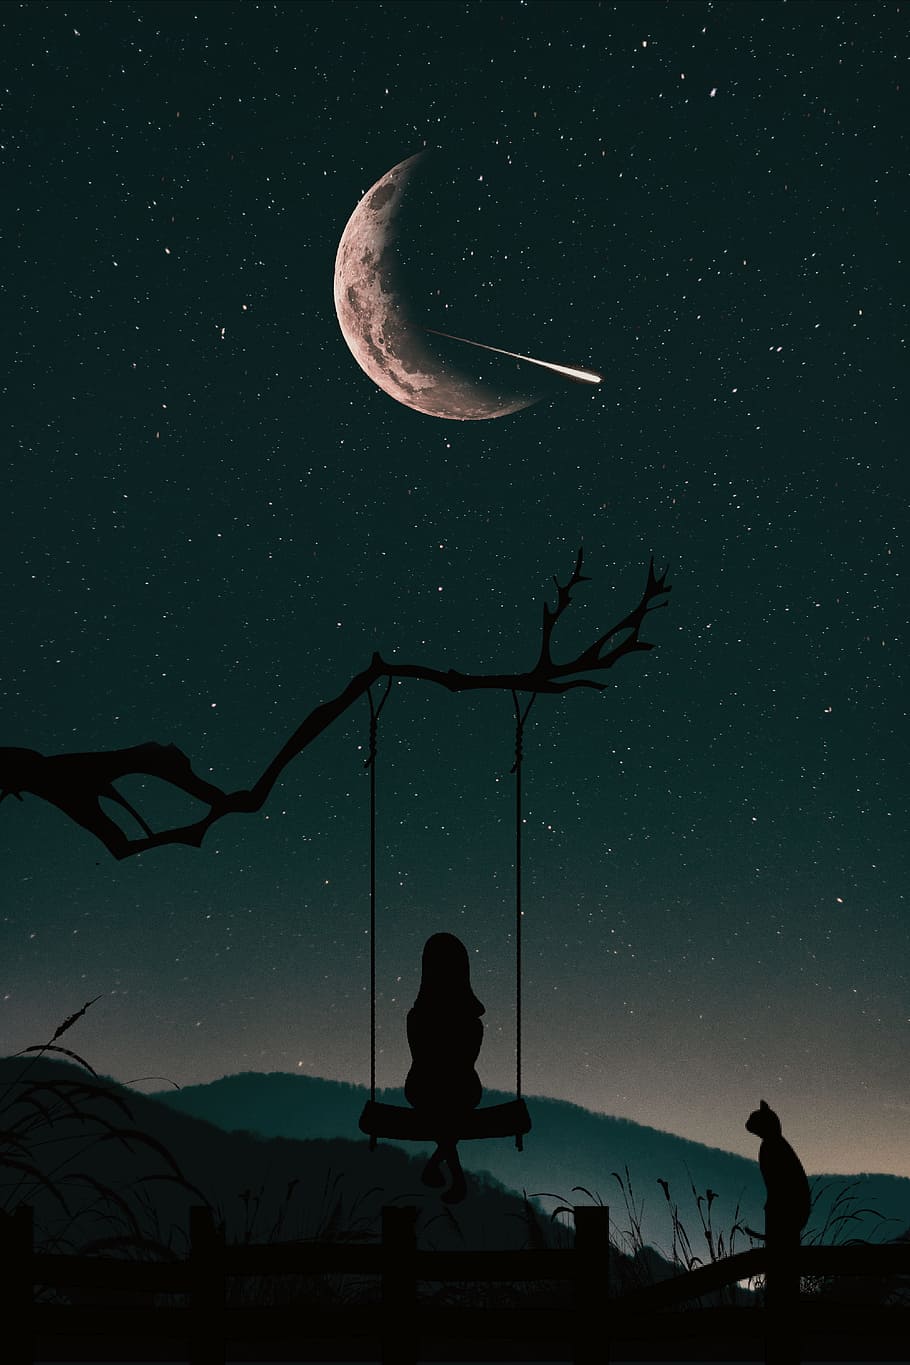 HD wallpaper silhouette of girl sitting on swing fixed to a tree branch  under bright starry night sky with crescent moon illustration  Wallpaper  Flare